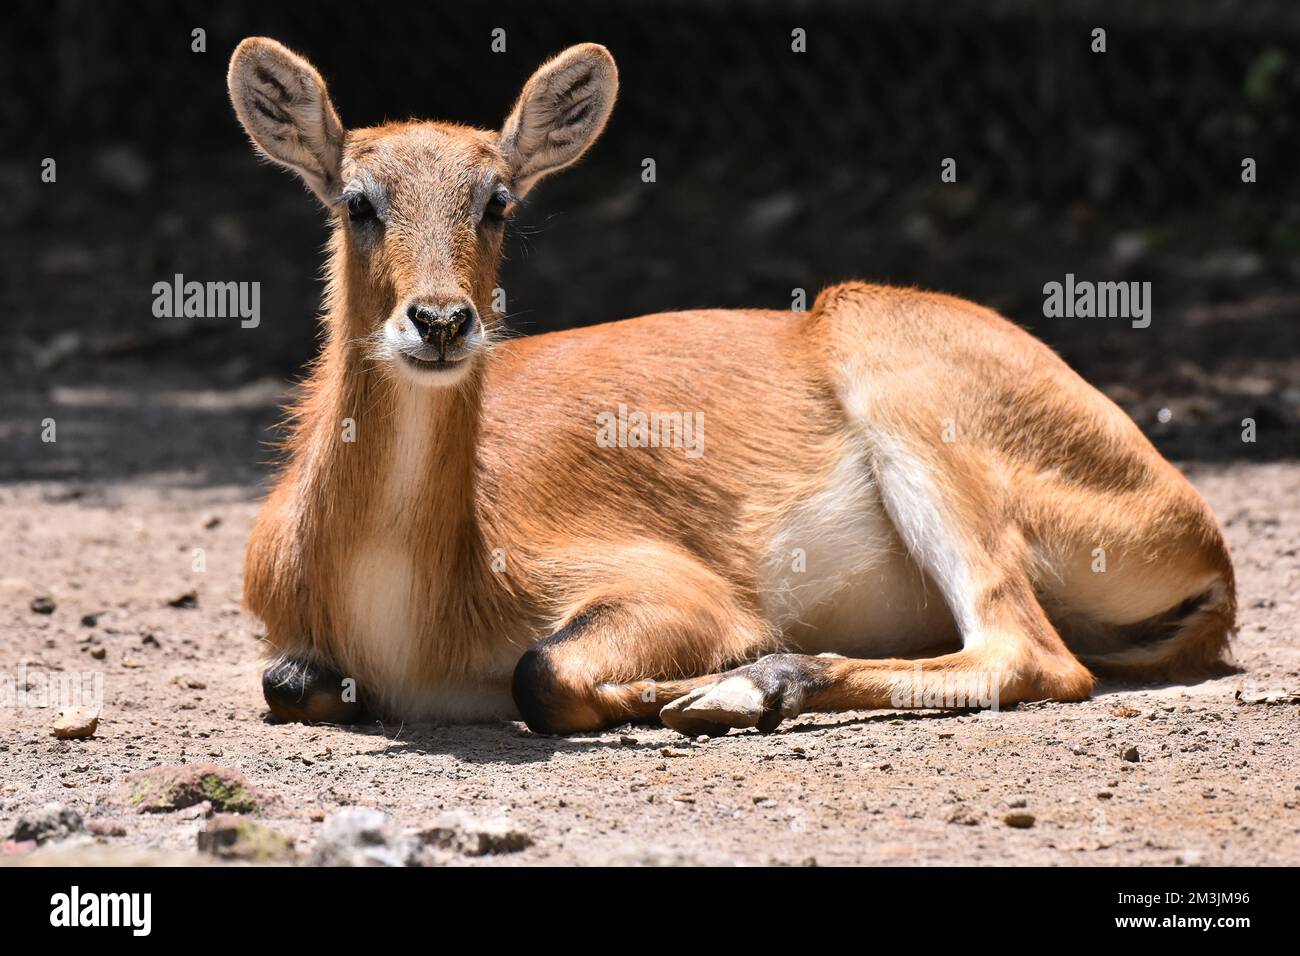 A Impala species  seen in its habitat during a species conservation program, the zoo has 1803 animals in captivity at Chapultepec Zoo. Stock Photo